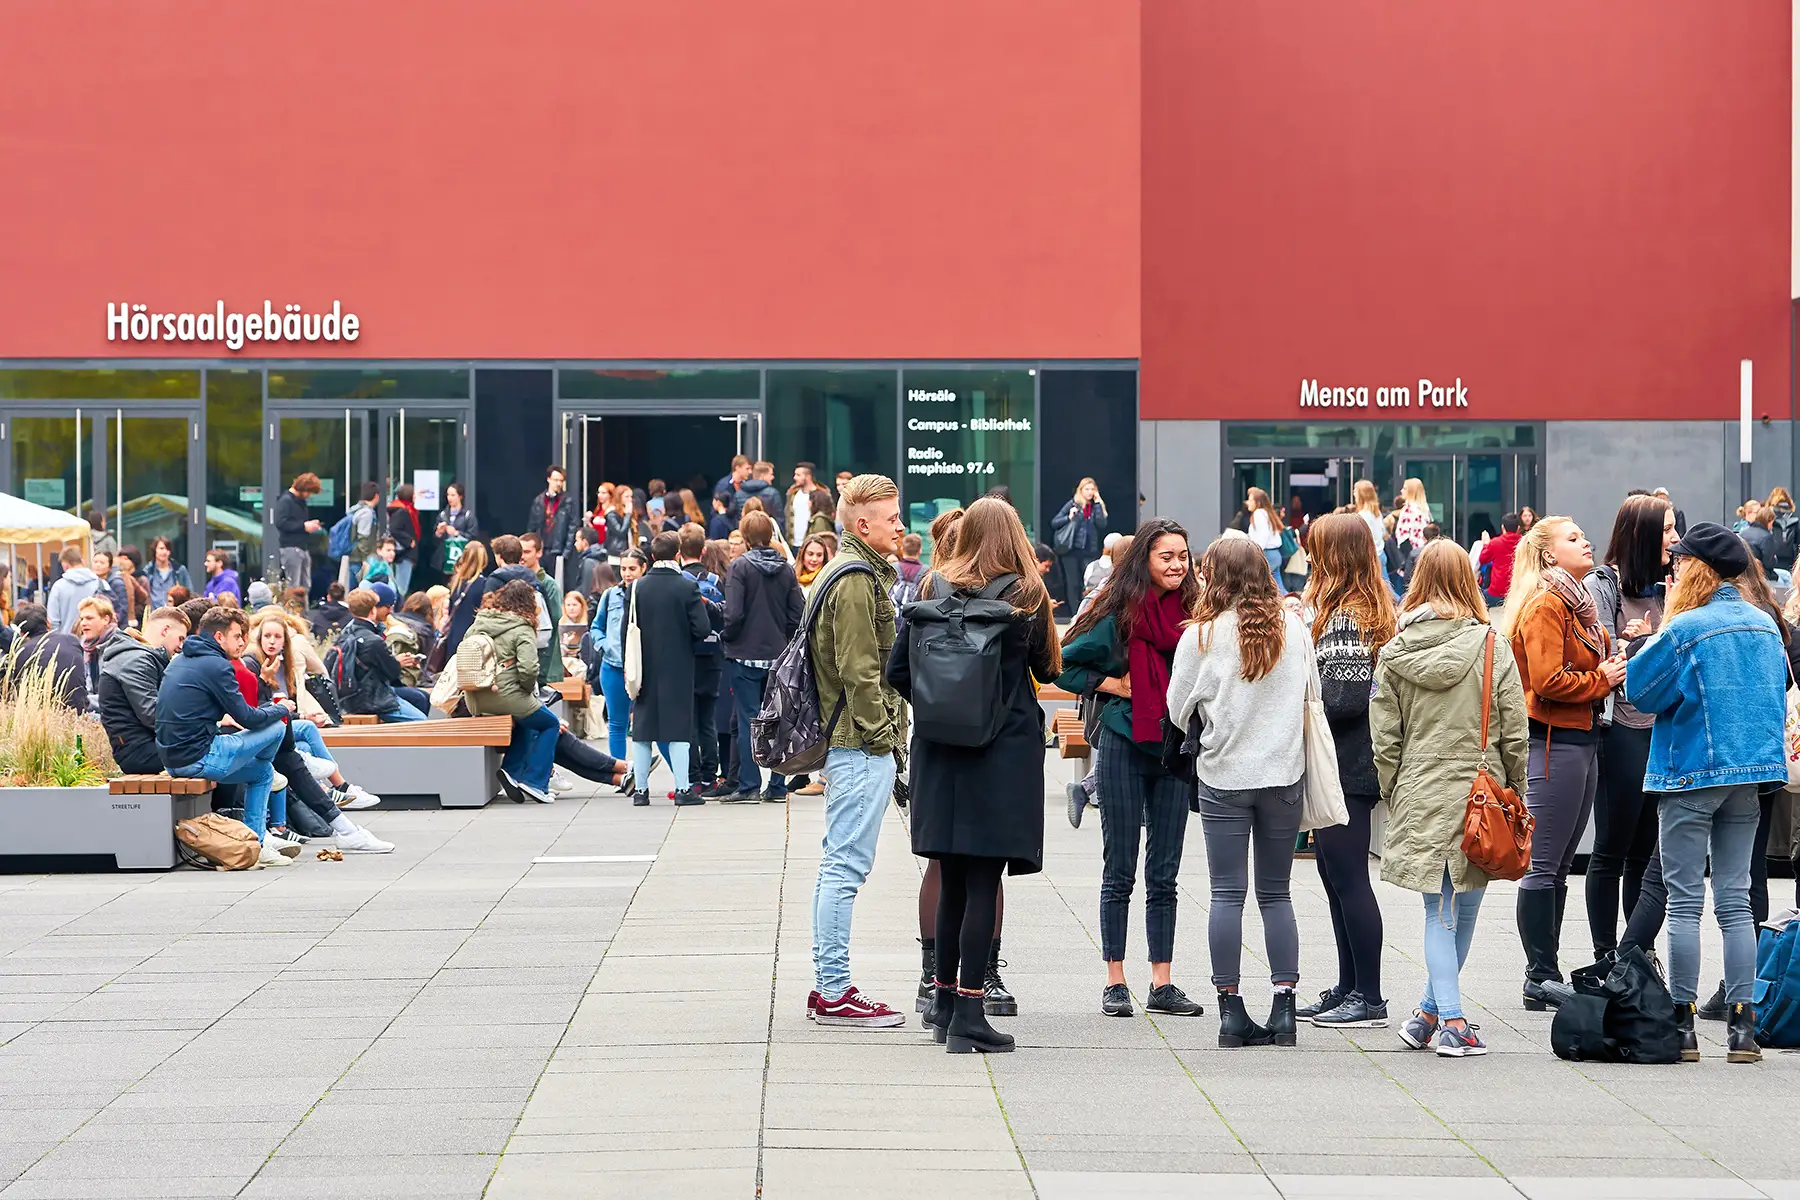 Groups of students standing outside a university campus